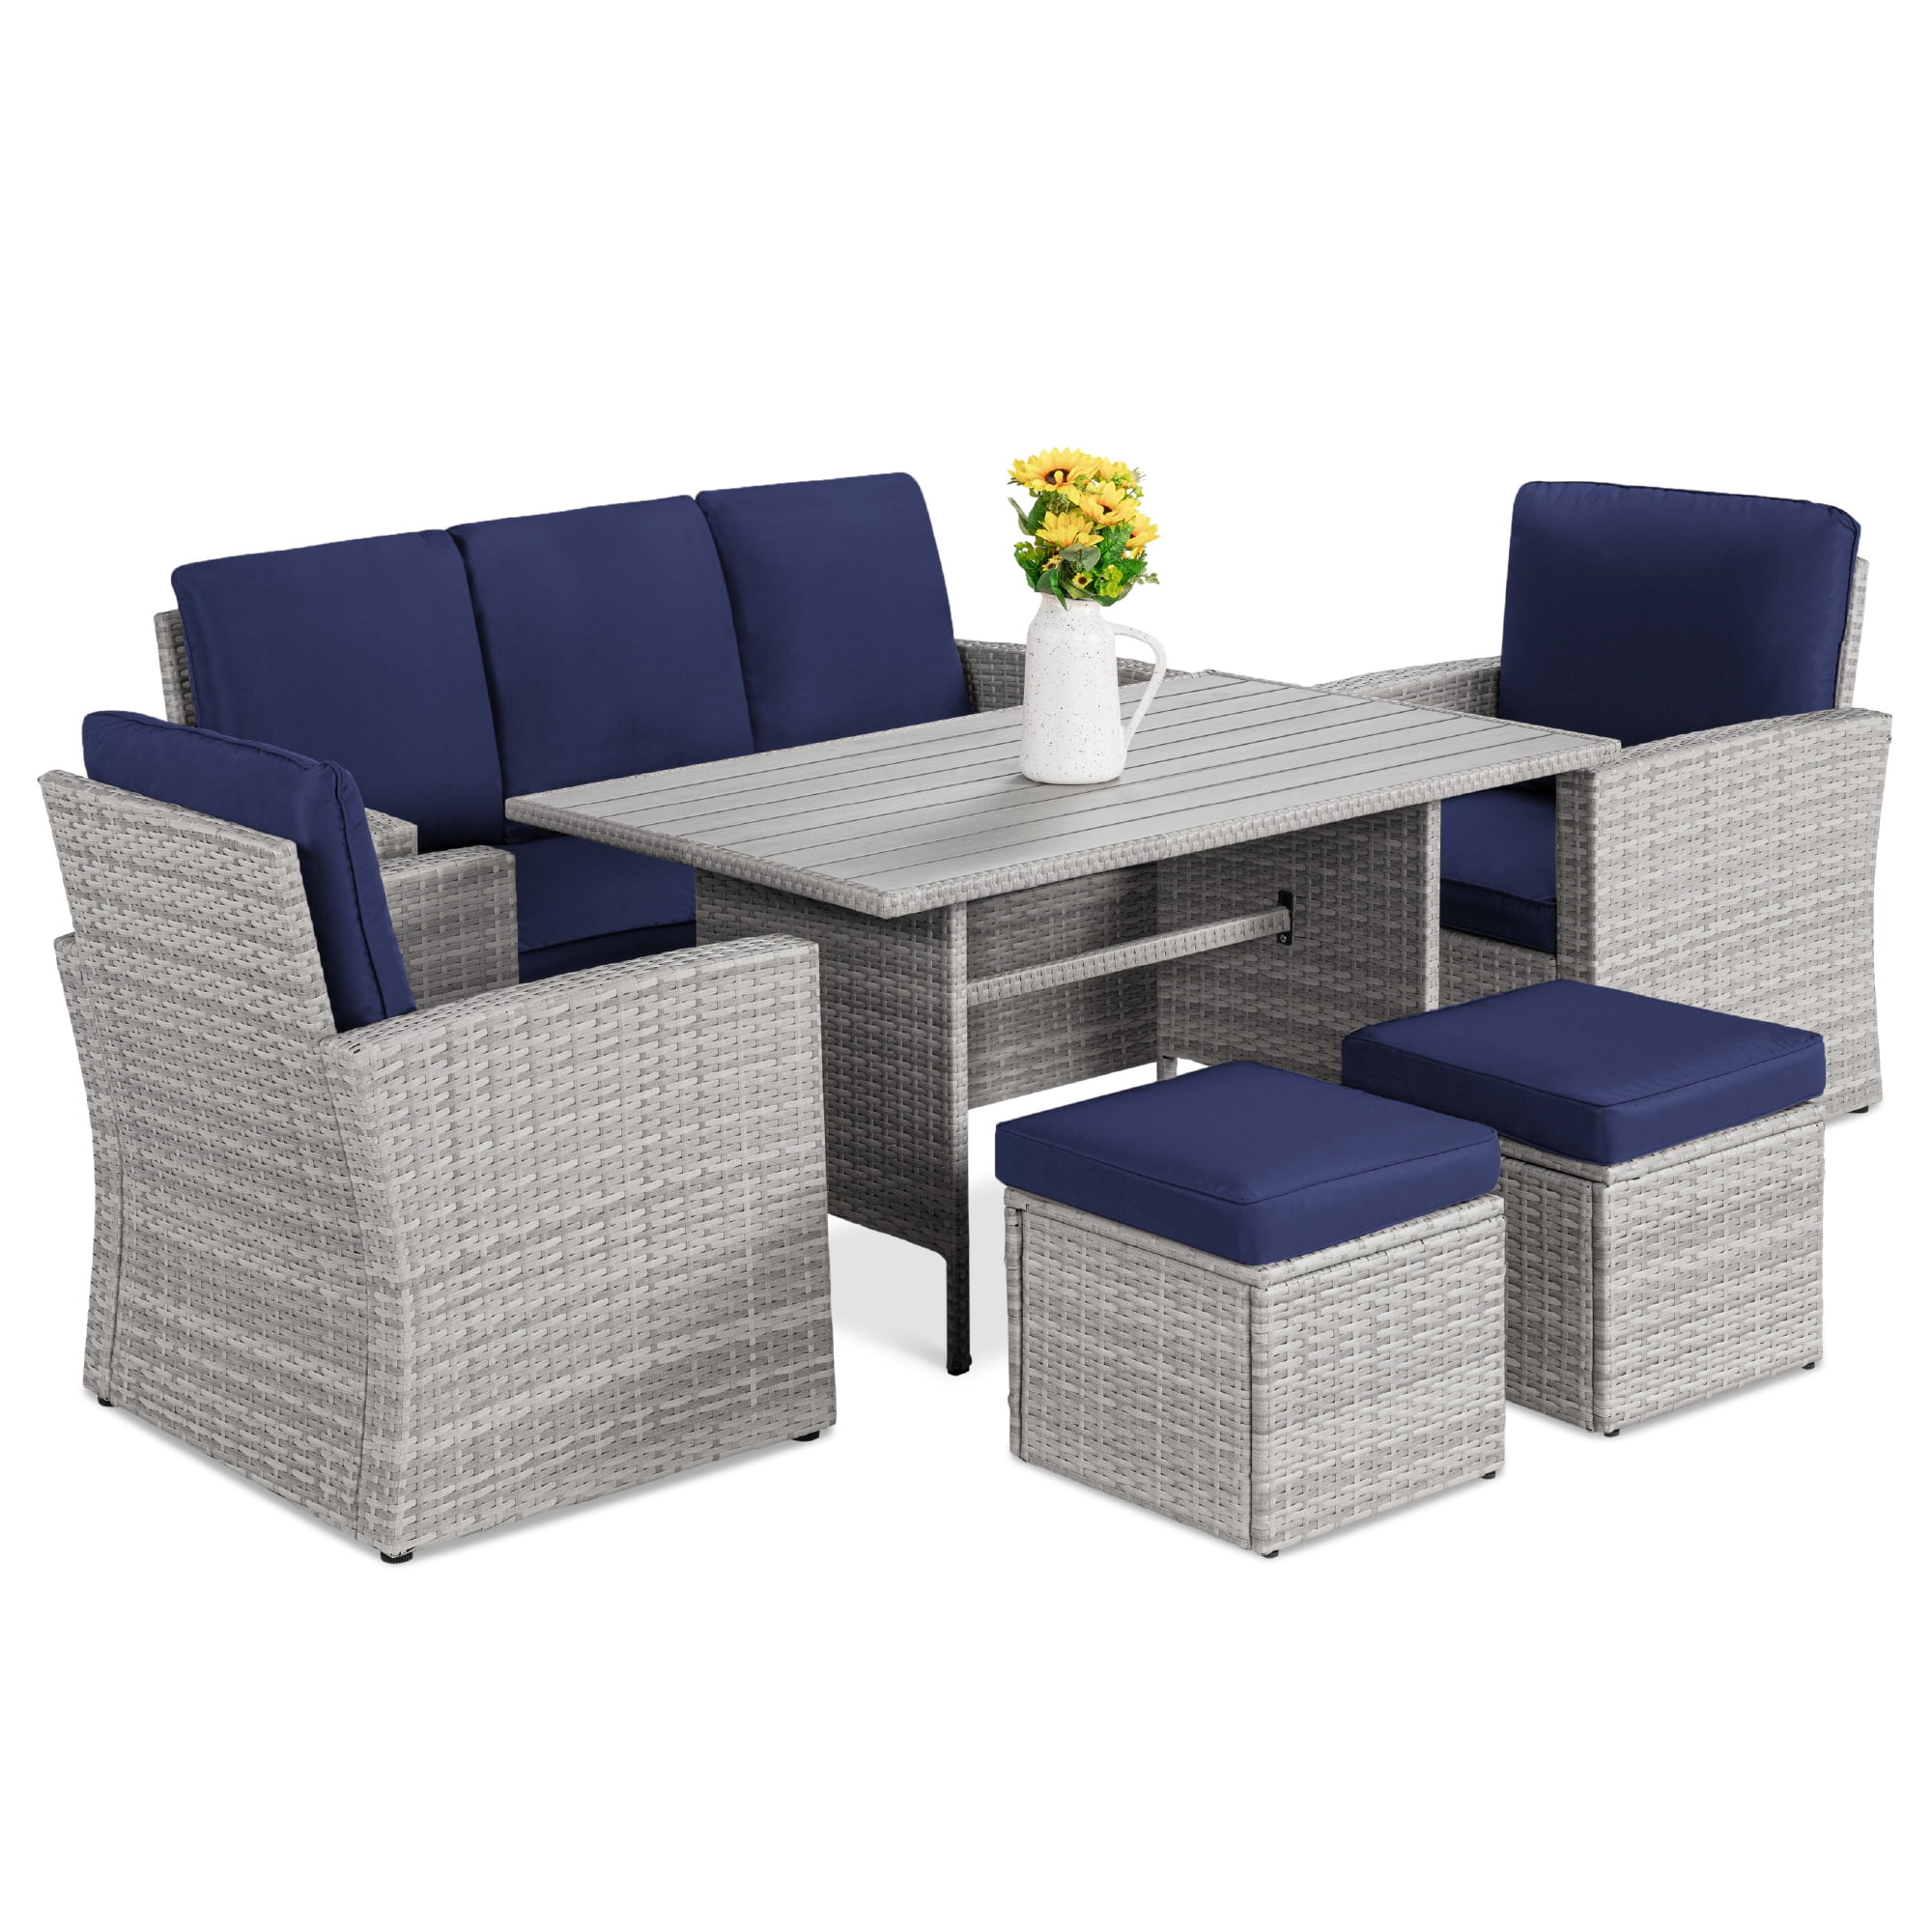 Seater Conversation Wicker Dining Table, Best Patio Furniture For Large Person